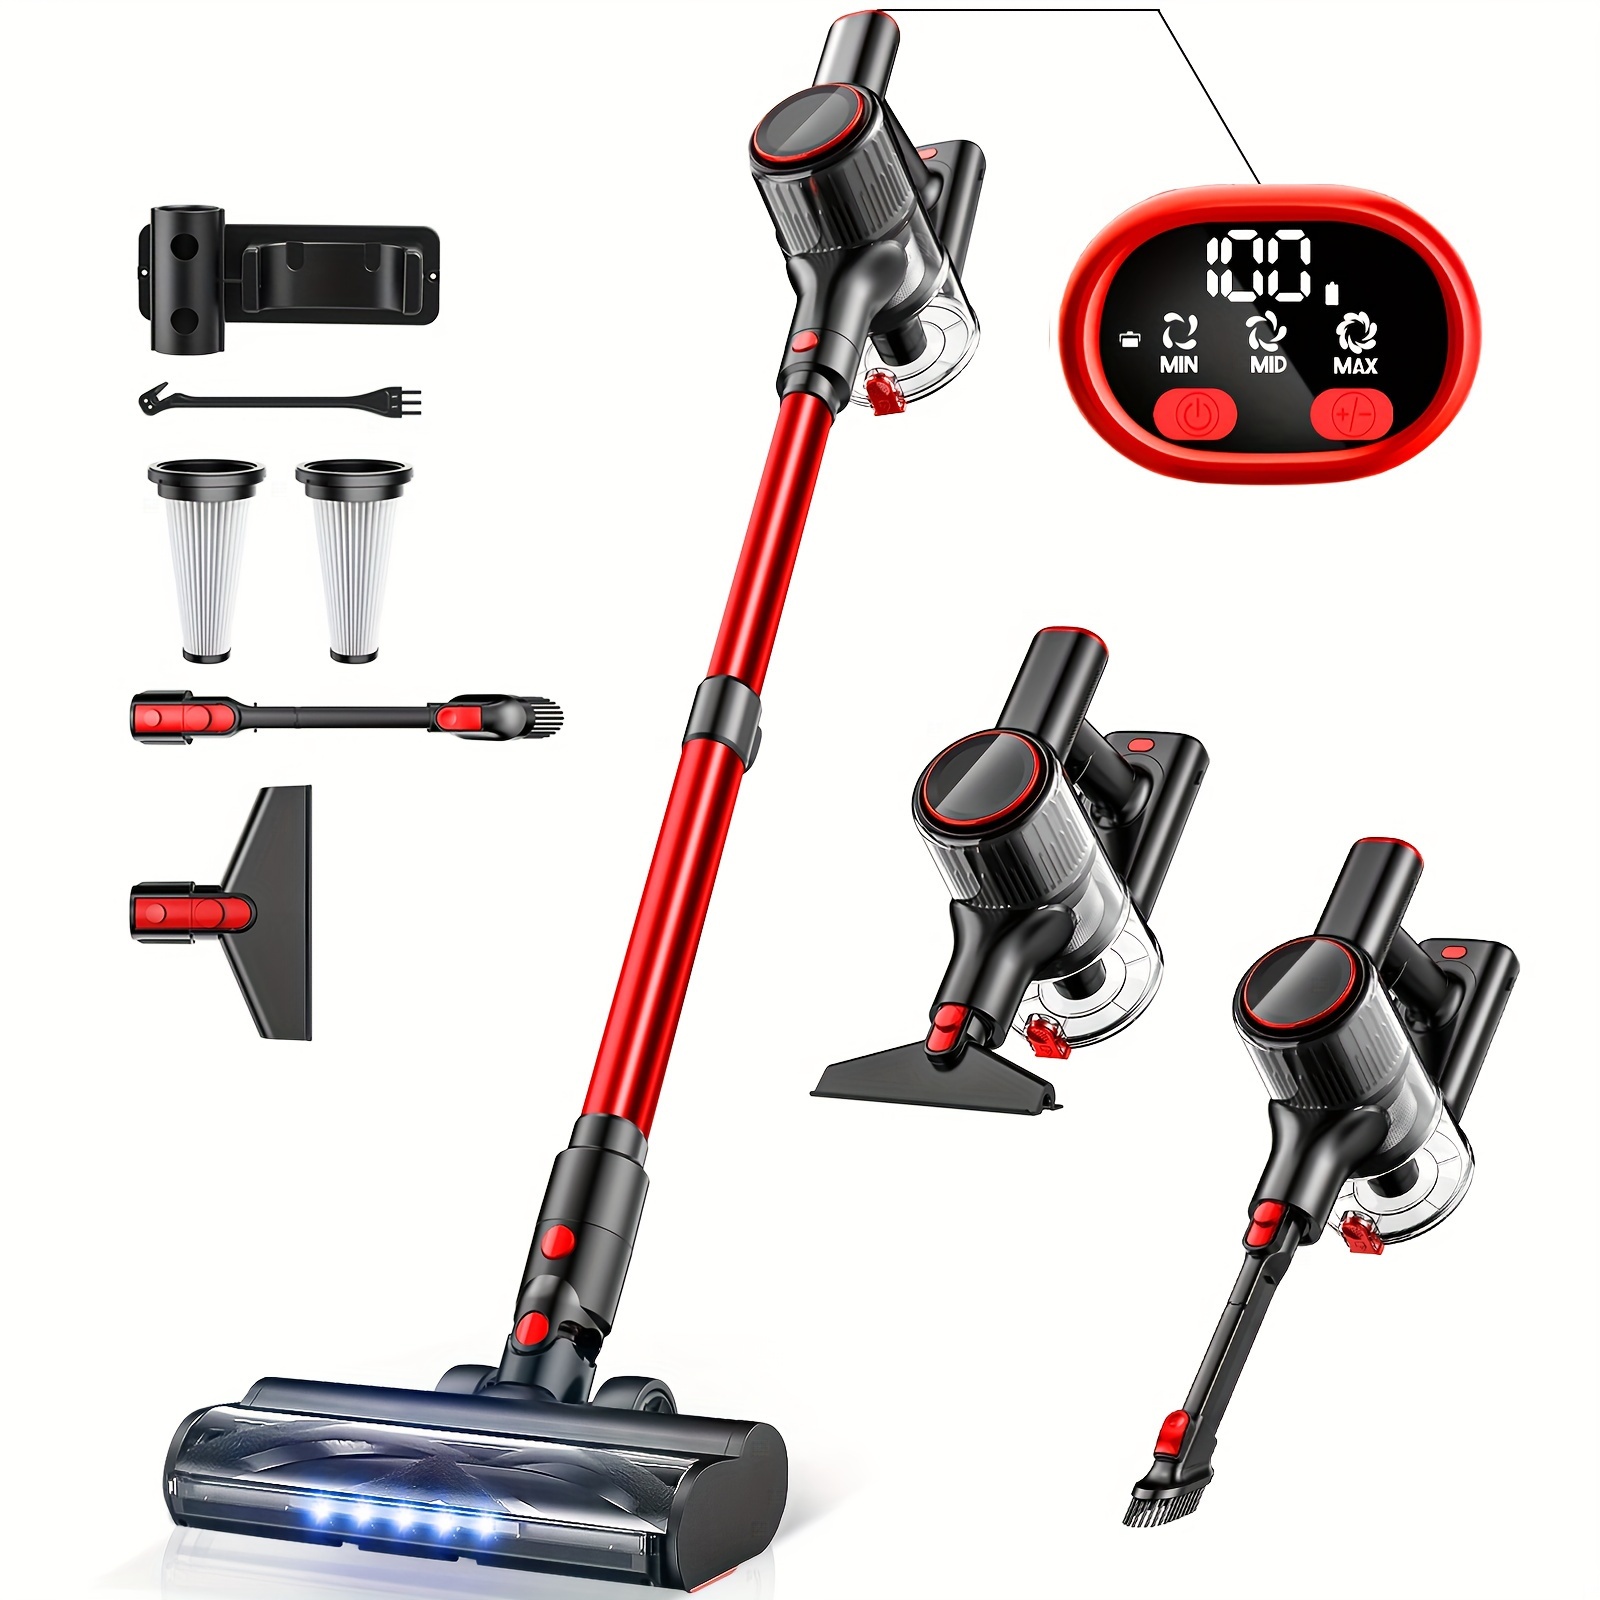 

Cordless Vacuum Cleaner, 6-in-1 Strong Suction Bar Vacuum With Led Display, 3-suction Mode, Anti-tangle Light Vacuum Cleaner, Hard Floor, Carpet, Pet Hair